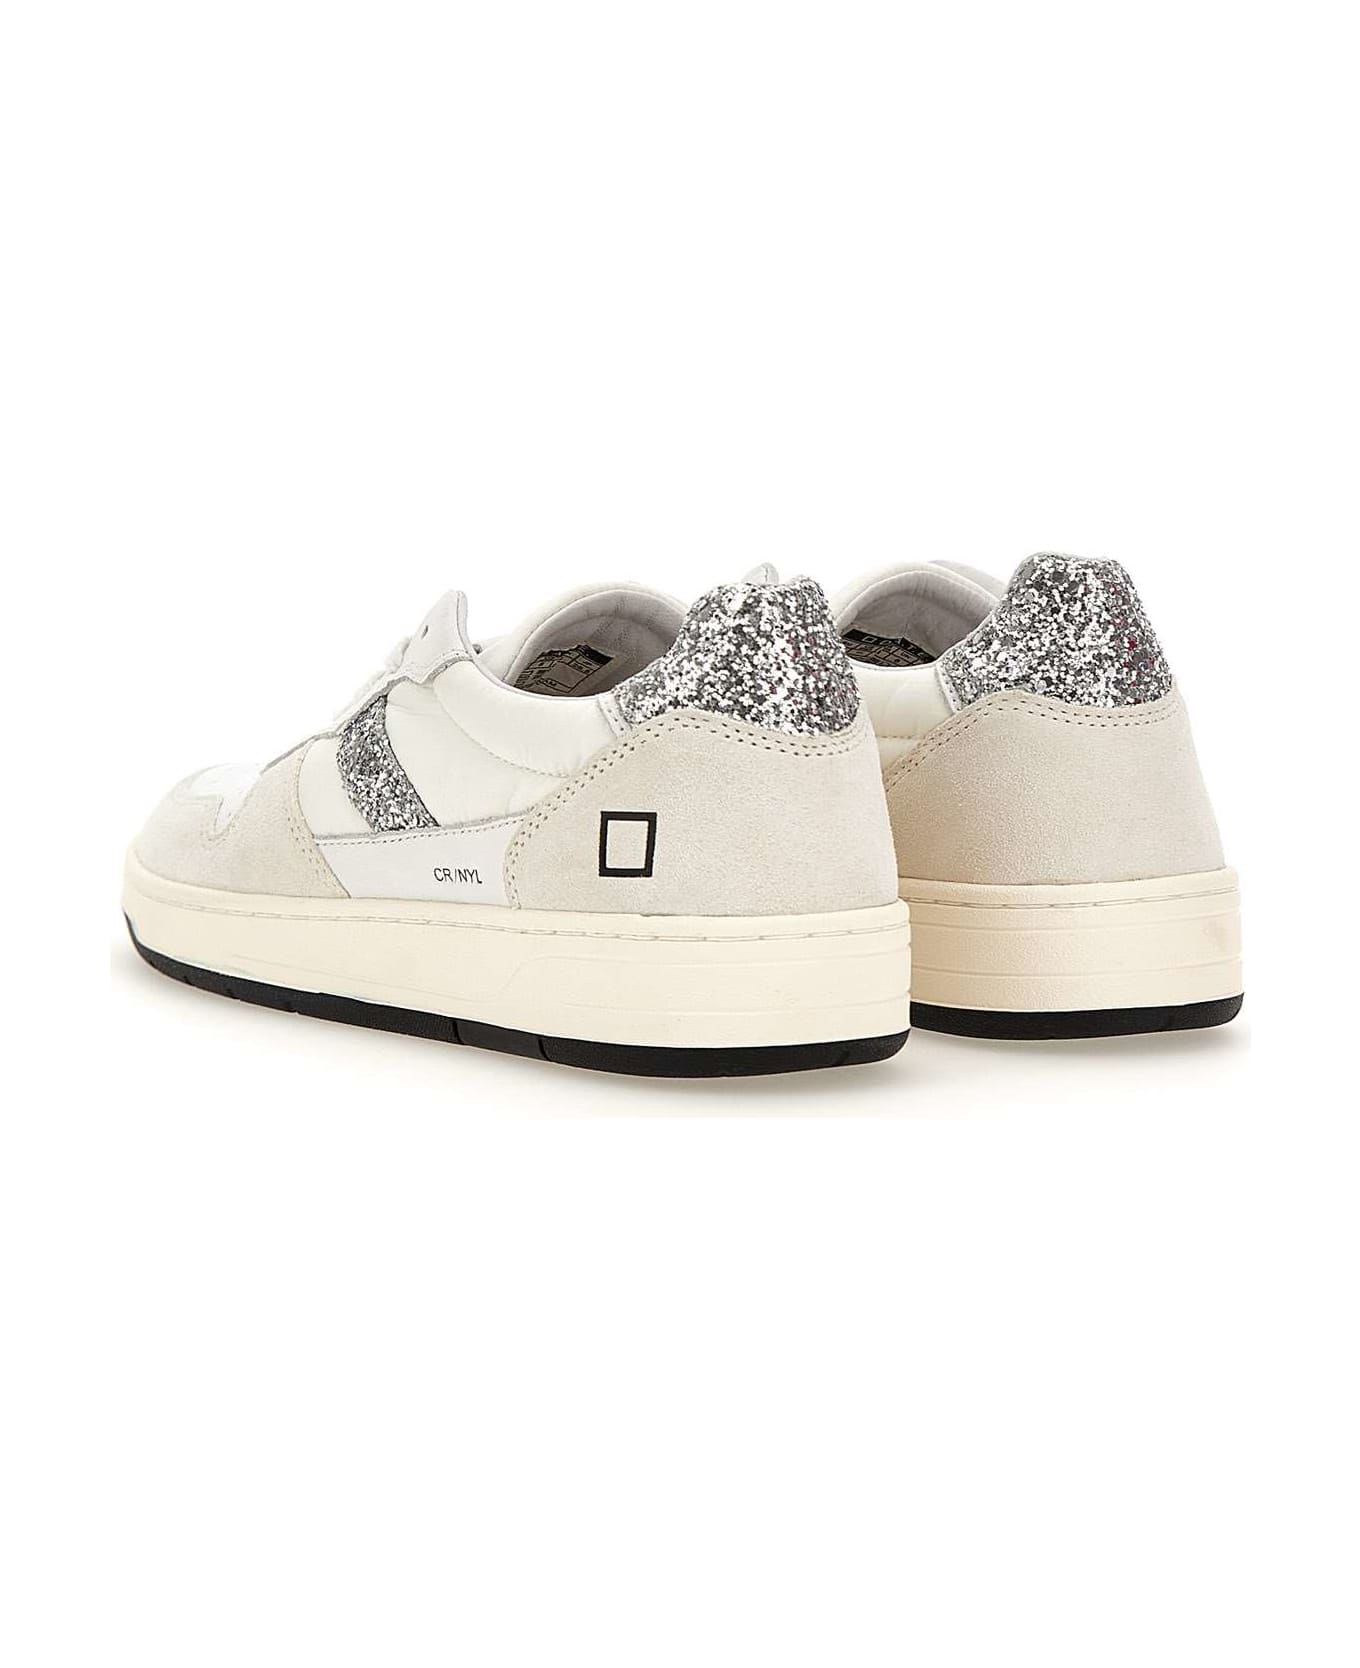 D.A.T.E. "court 2.0" Leather Sneakers - WHITE